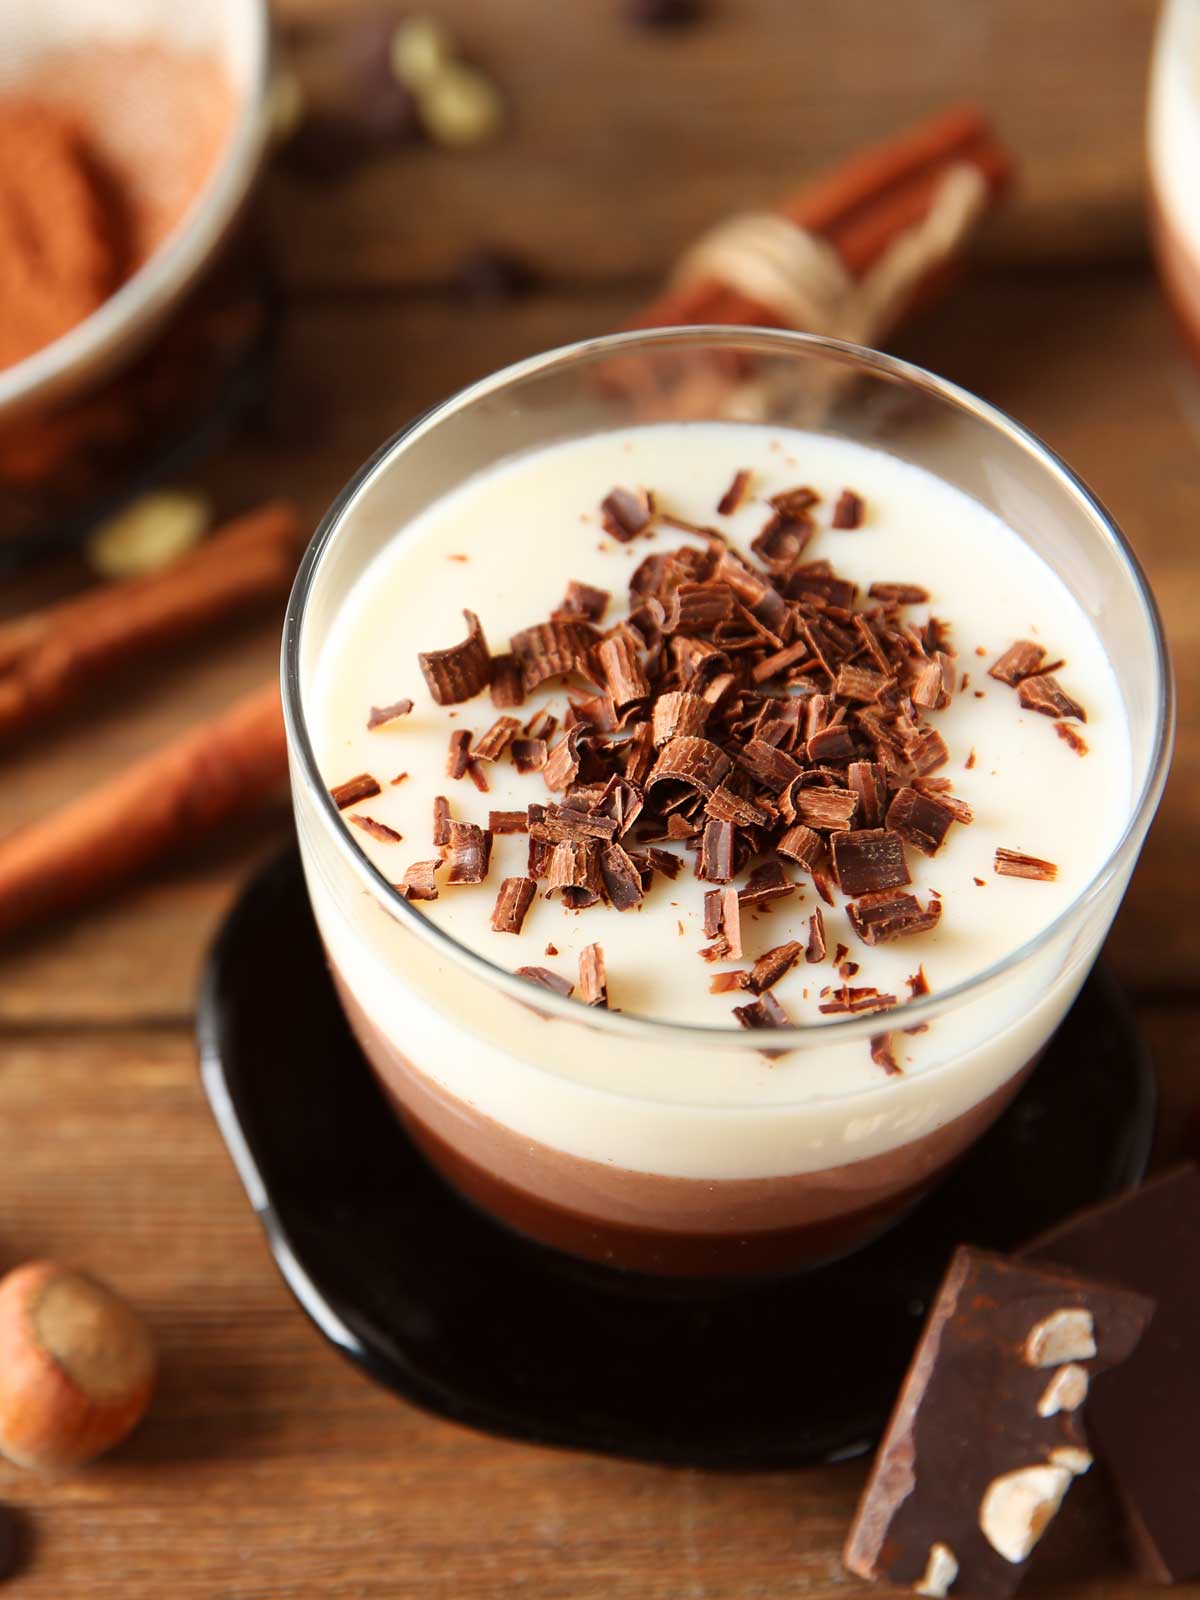 chocolate shavings on top of a glass of hot chocolate